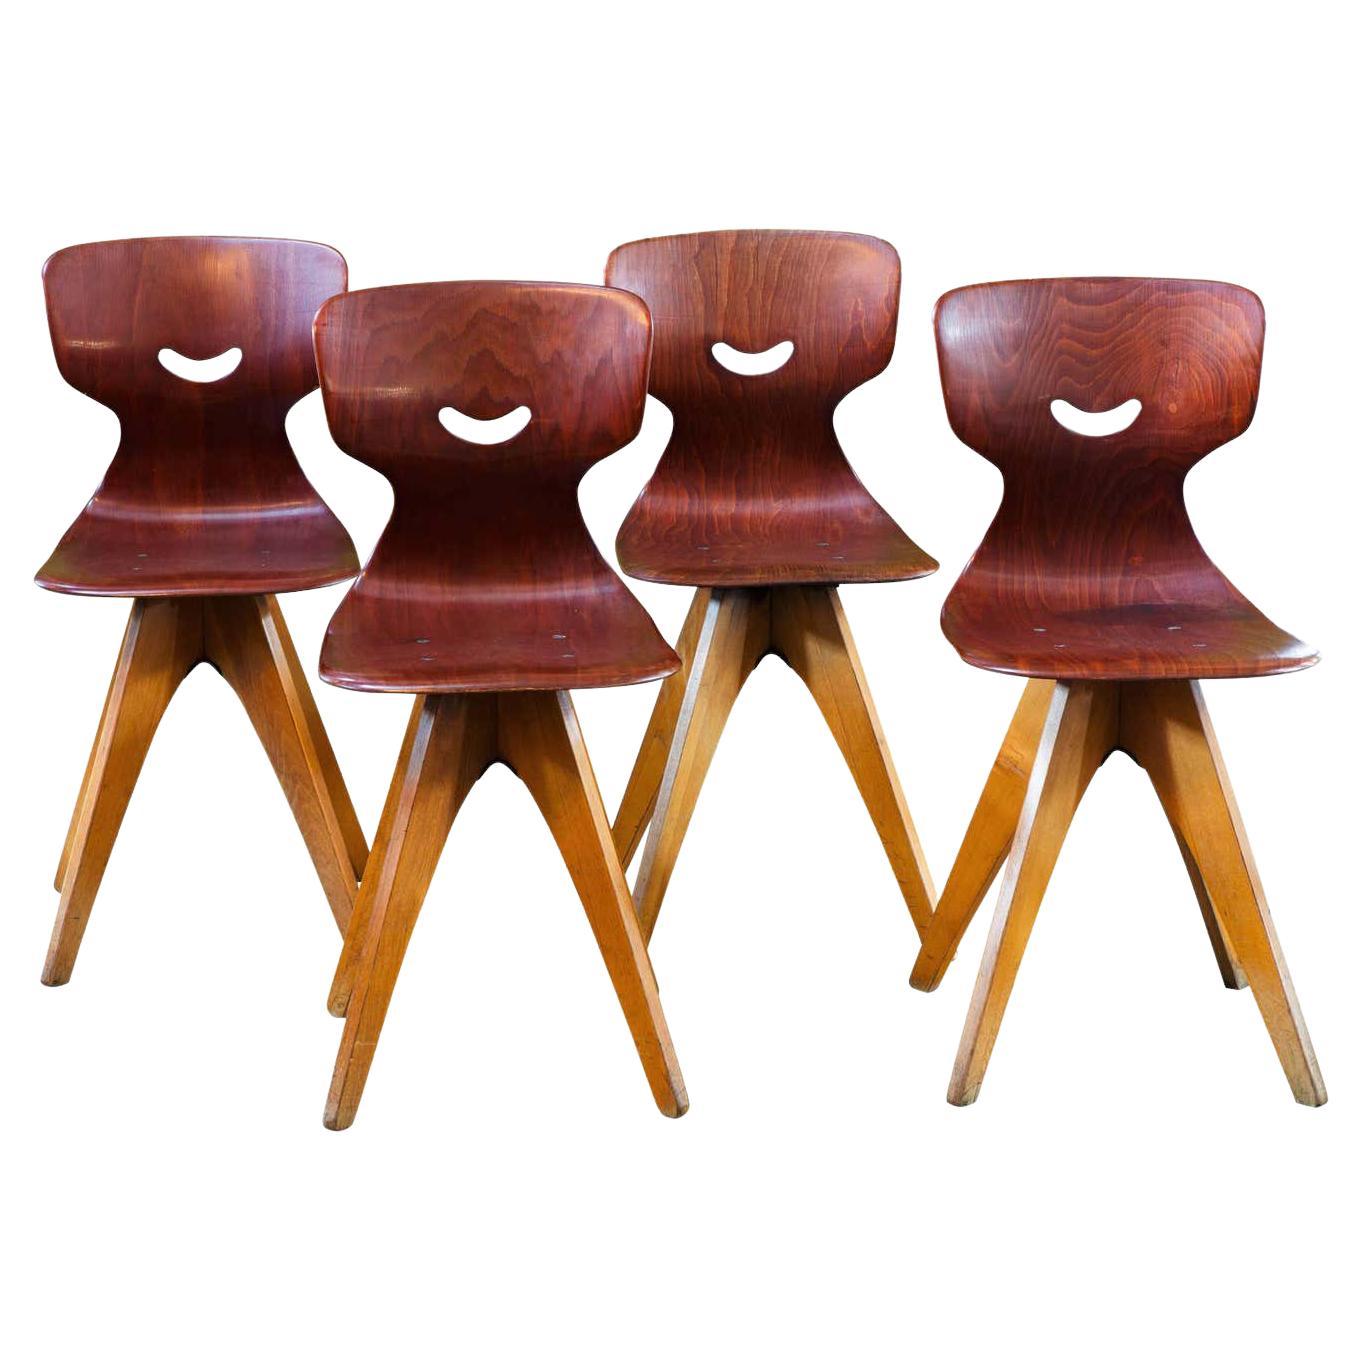 Set Four Midcentury German Plywood Chairs Designed by Adam Stegner for Pagholz